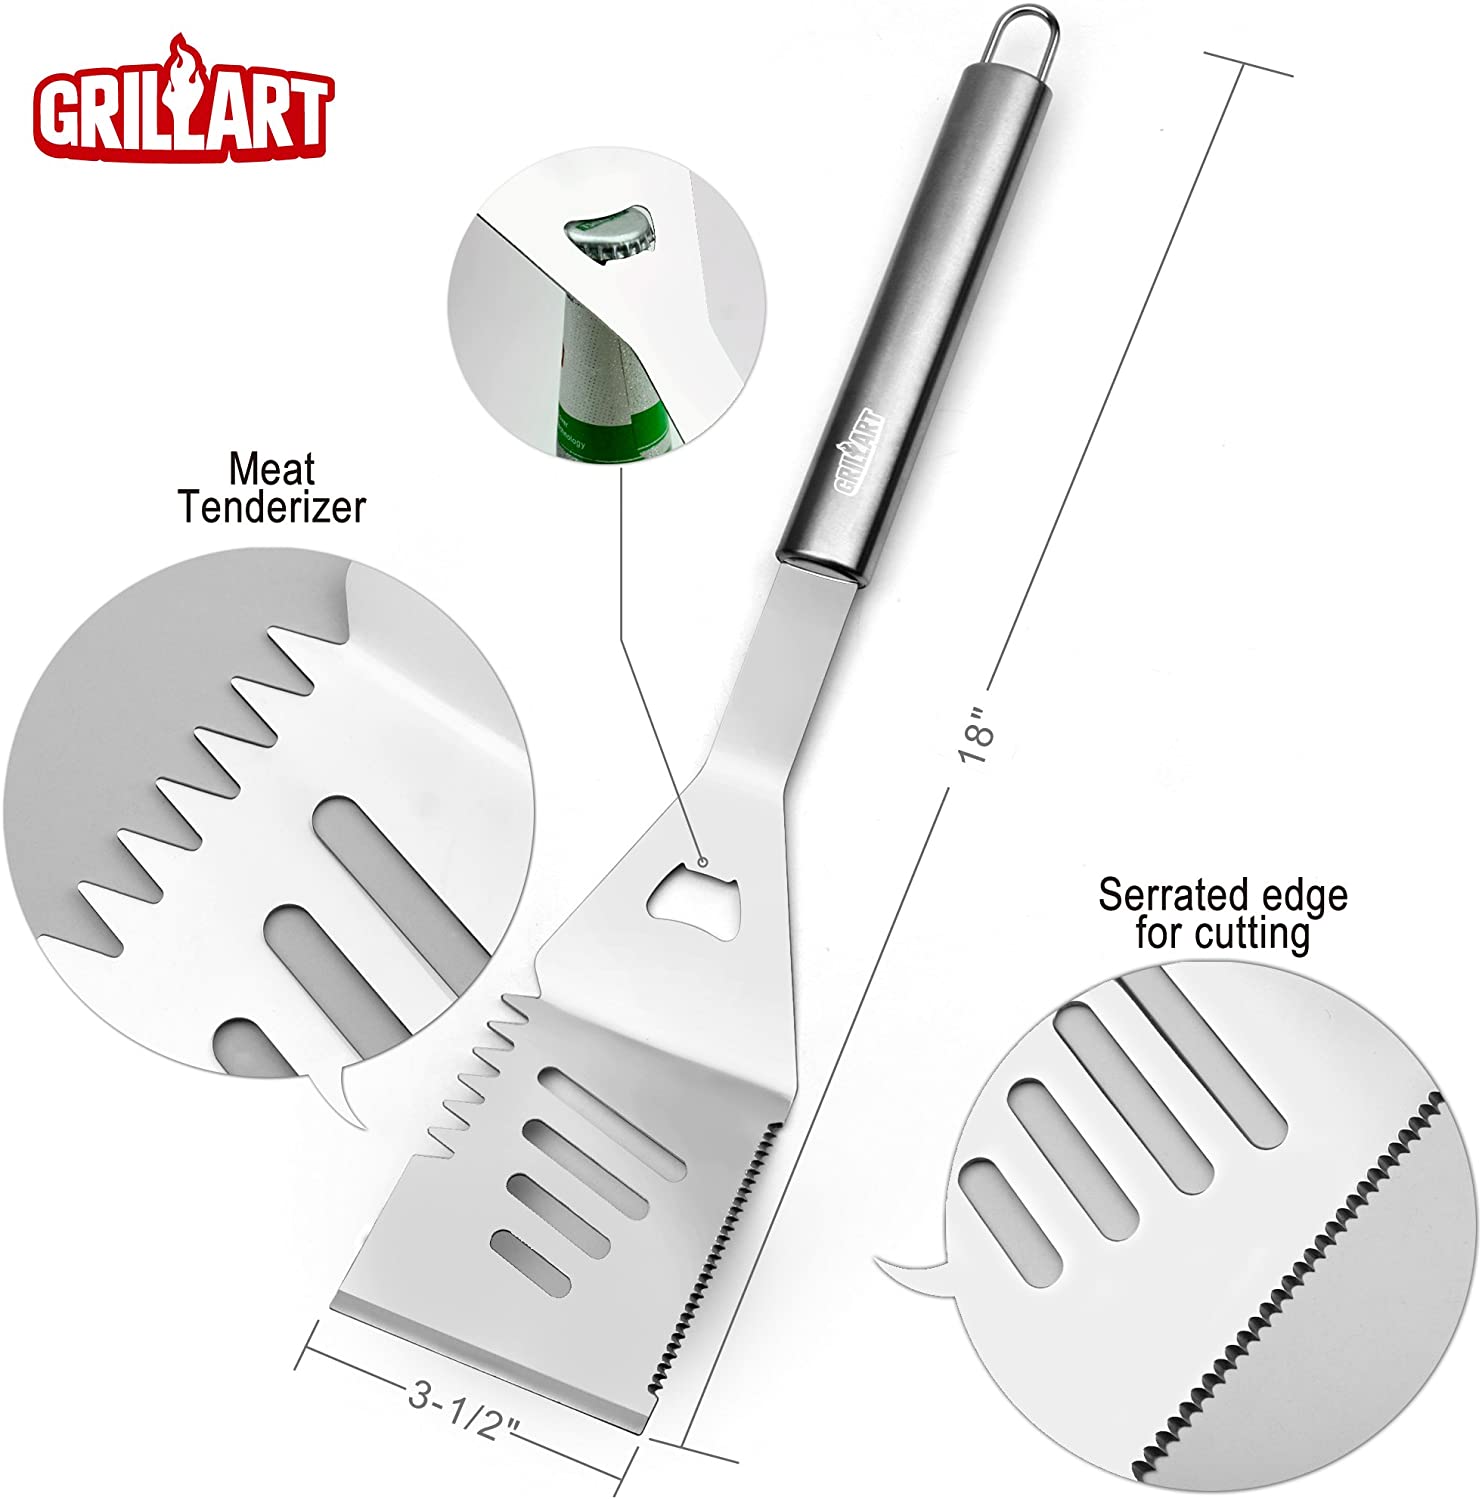 GRILLART Heavy Duty BBQ Grill Tools Set, Best Grilling Gifts for